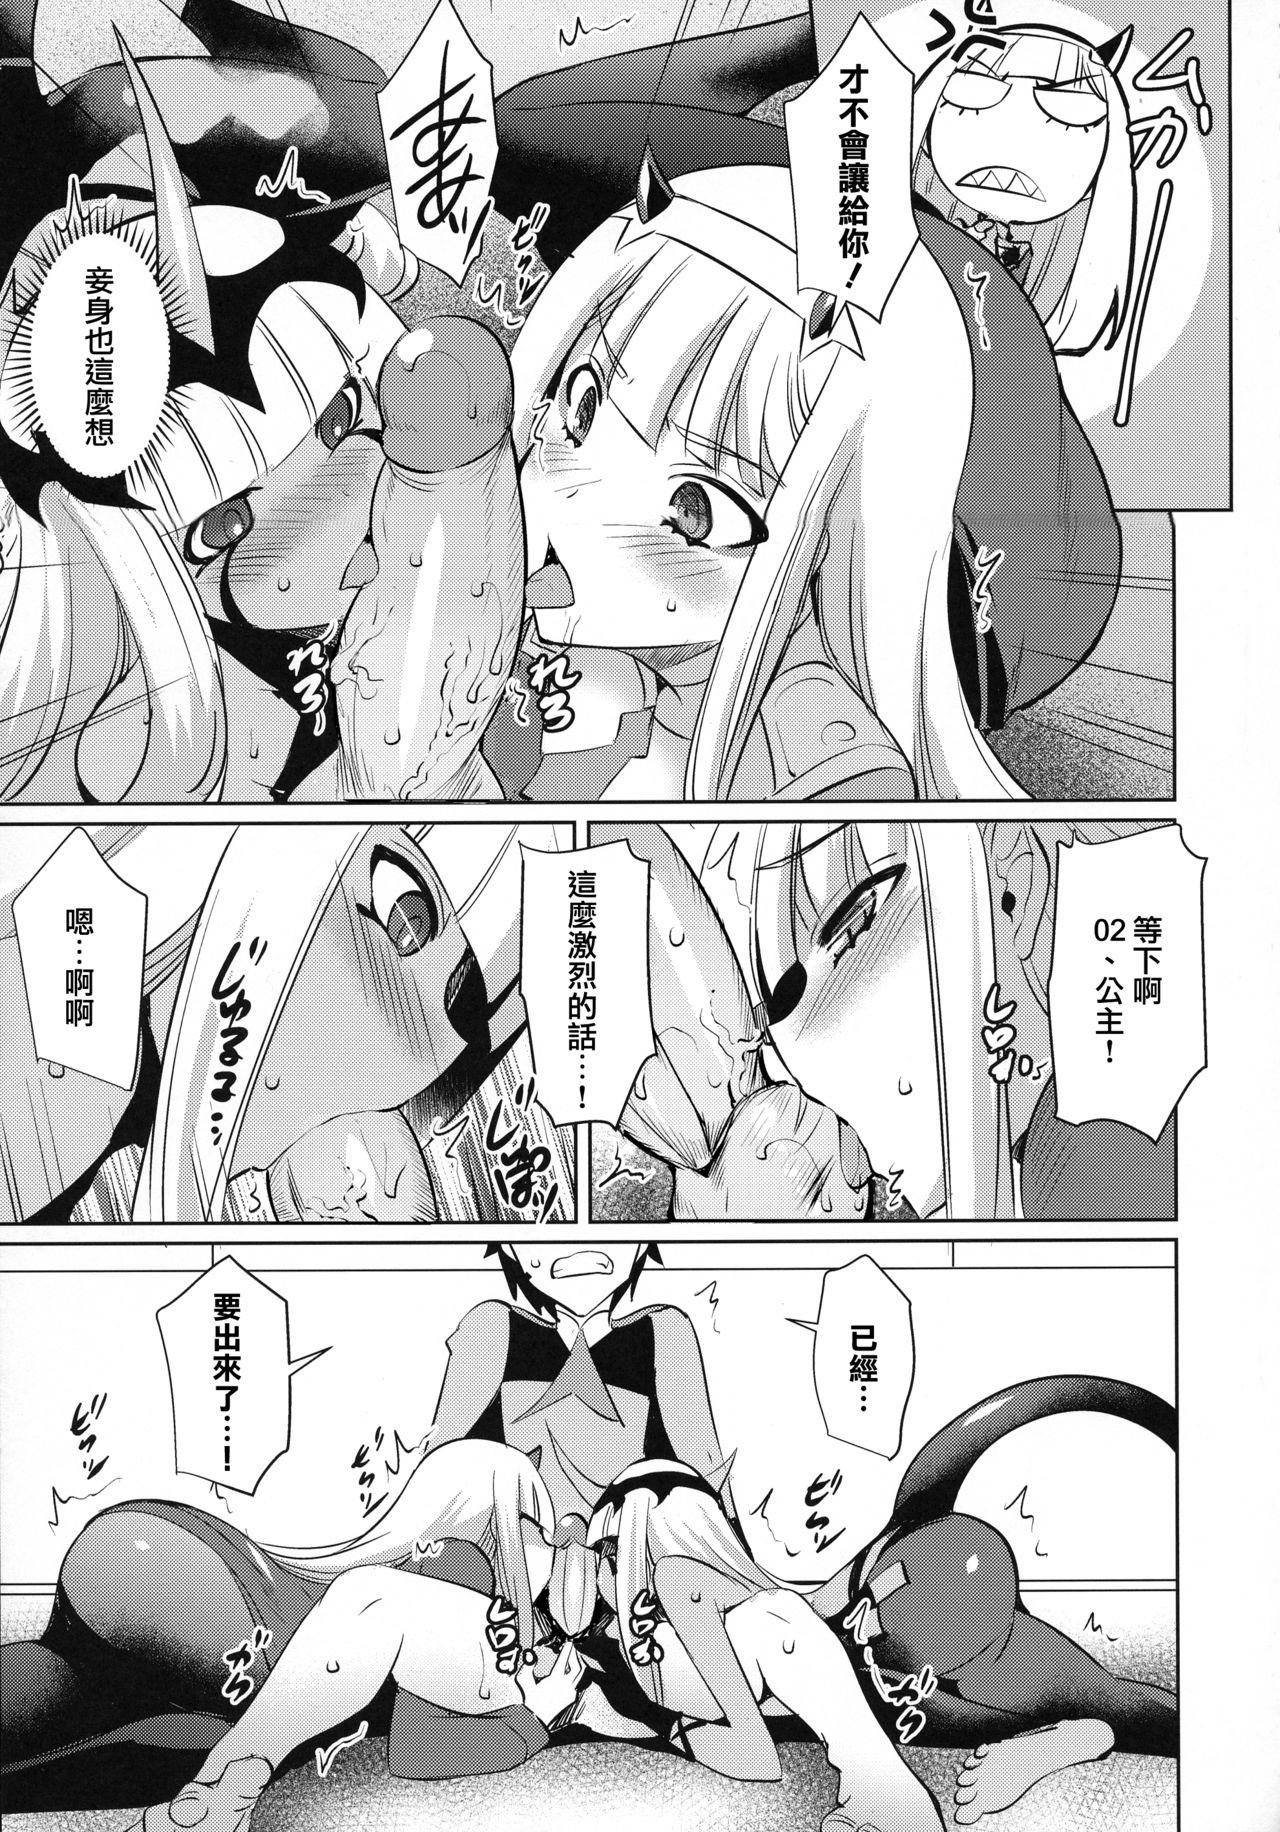 Collar Darling in the One and Two - Darling in the franxx Amateur Porn - Page 8